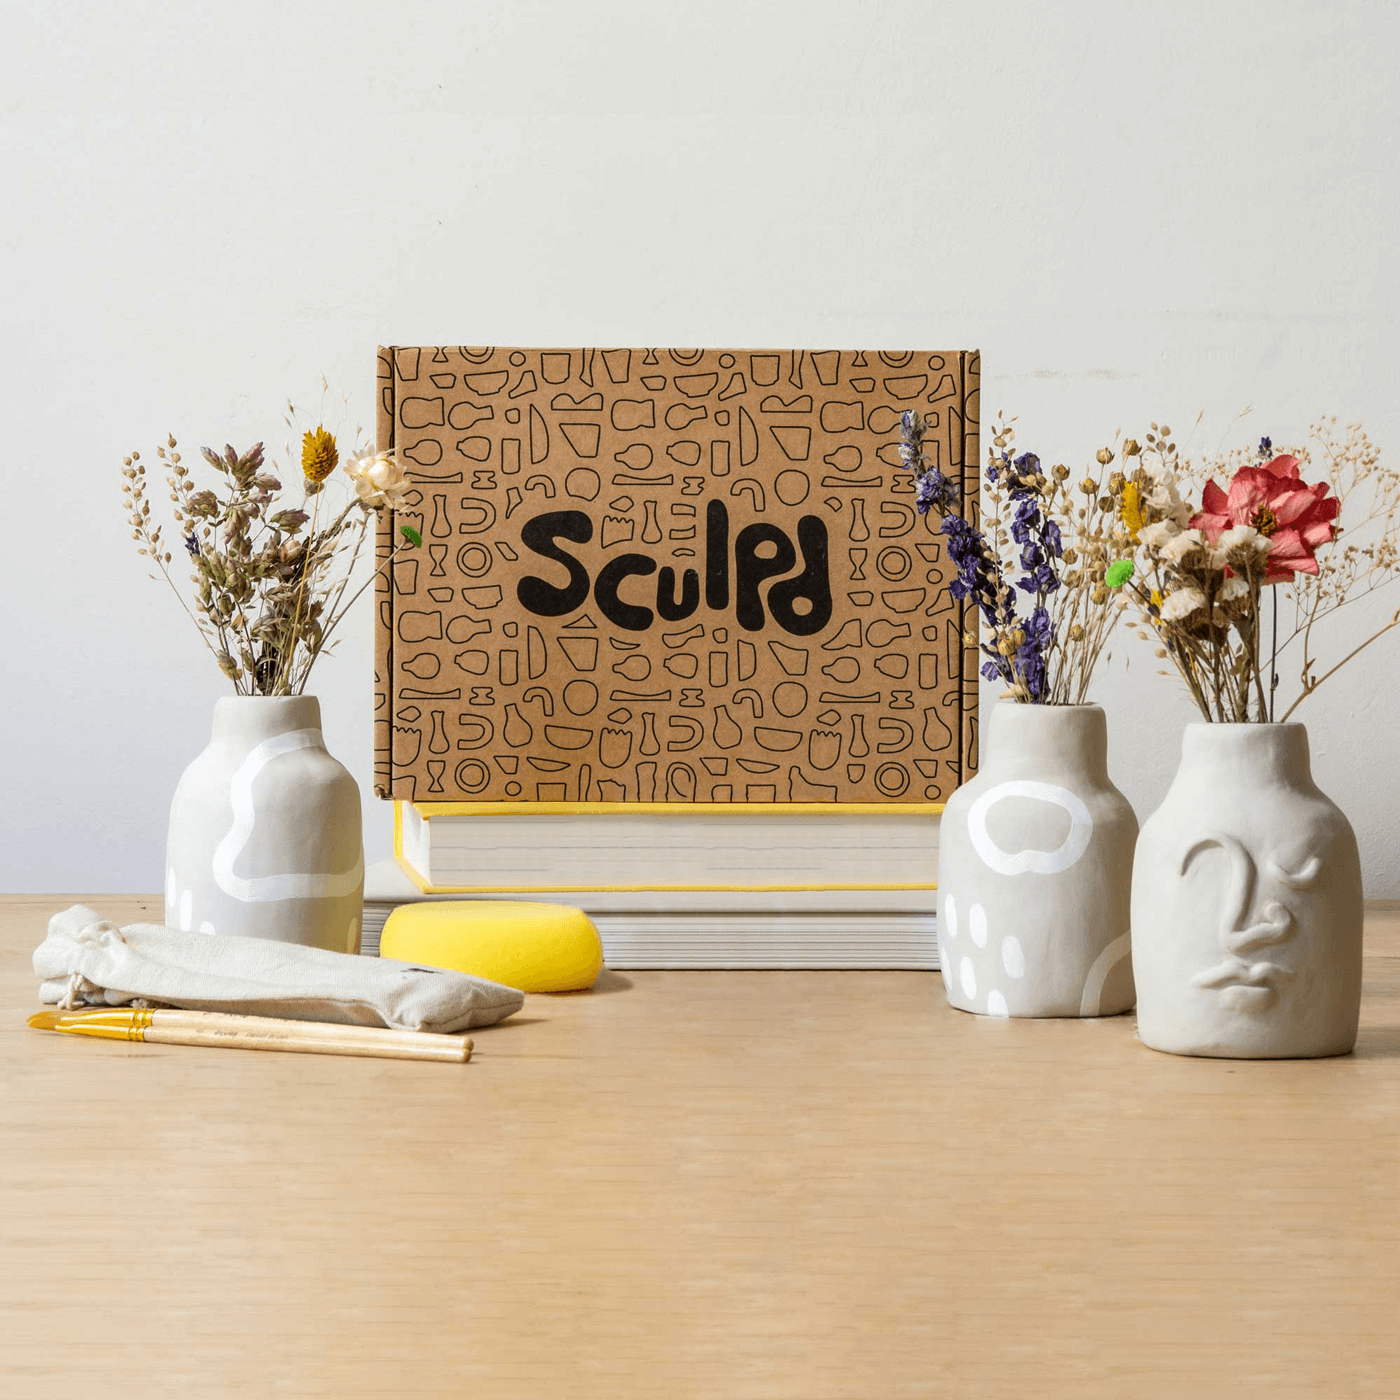 Sculpd Small Abstract Painting Kit - 30x40cm Canvas (Pastel)